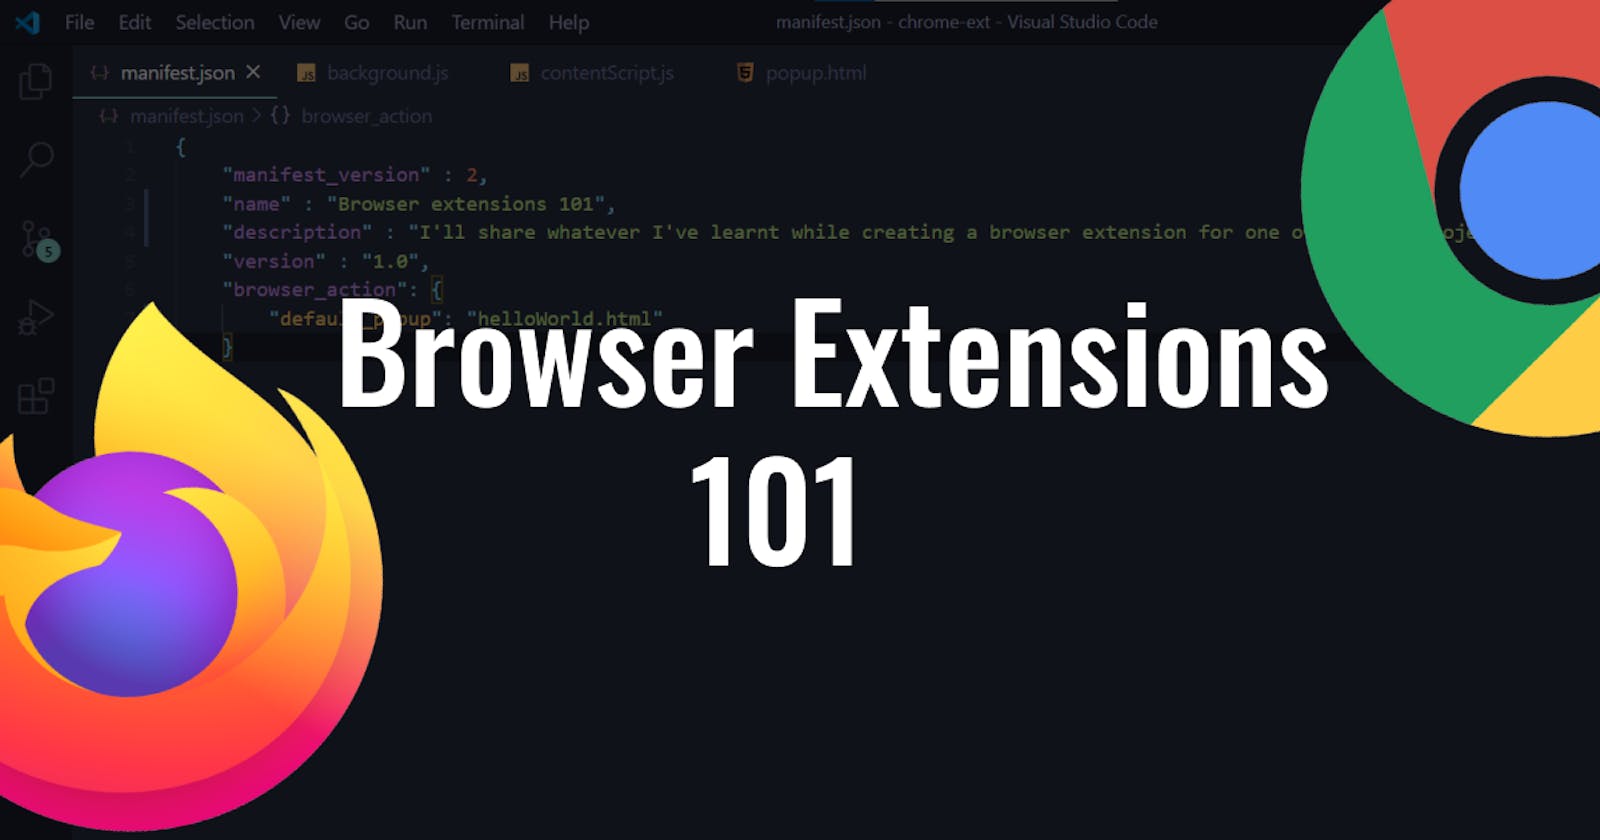 Browser extensions 101 : Helpful resources